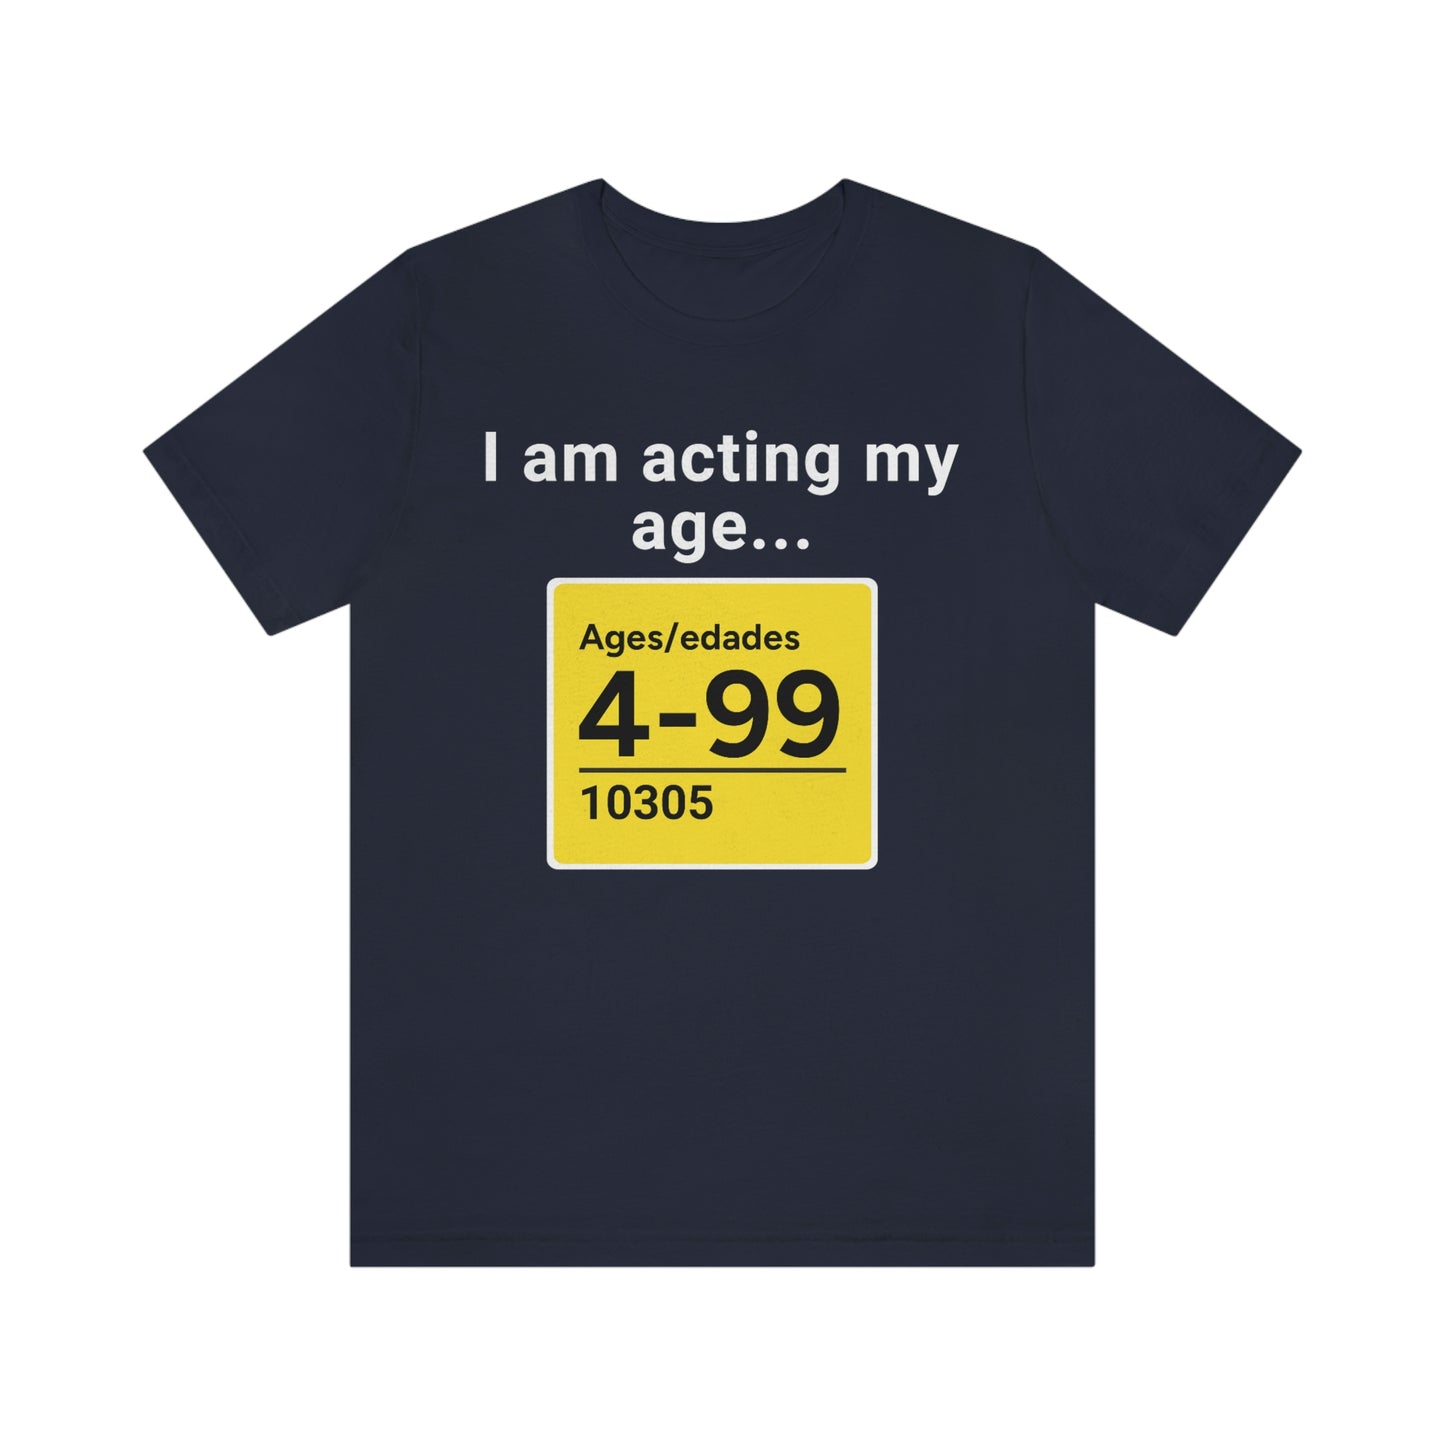 Act Your Age! T-Shirt